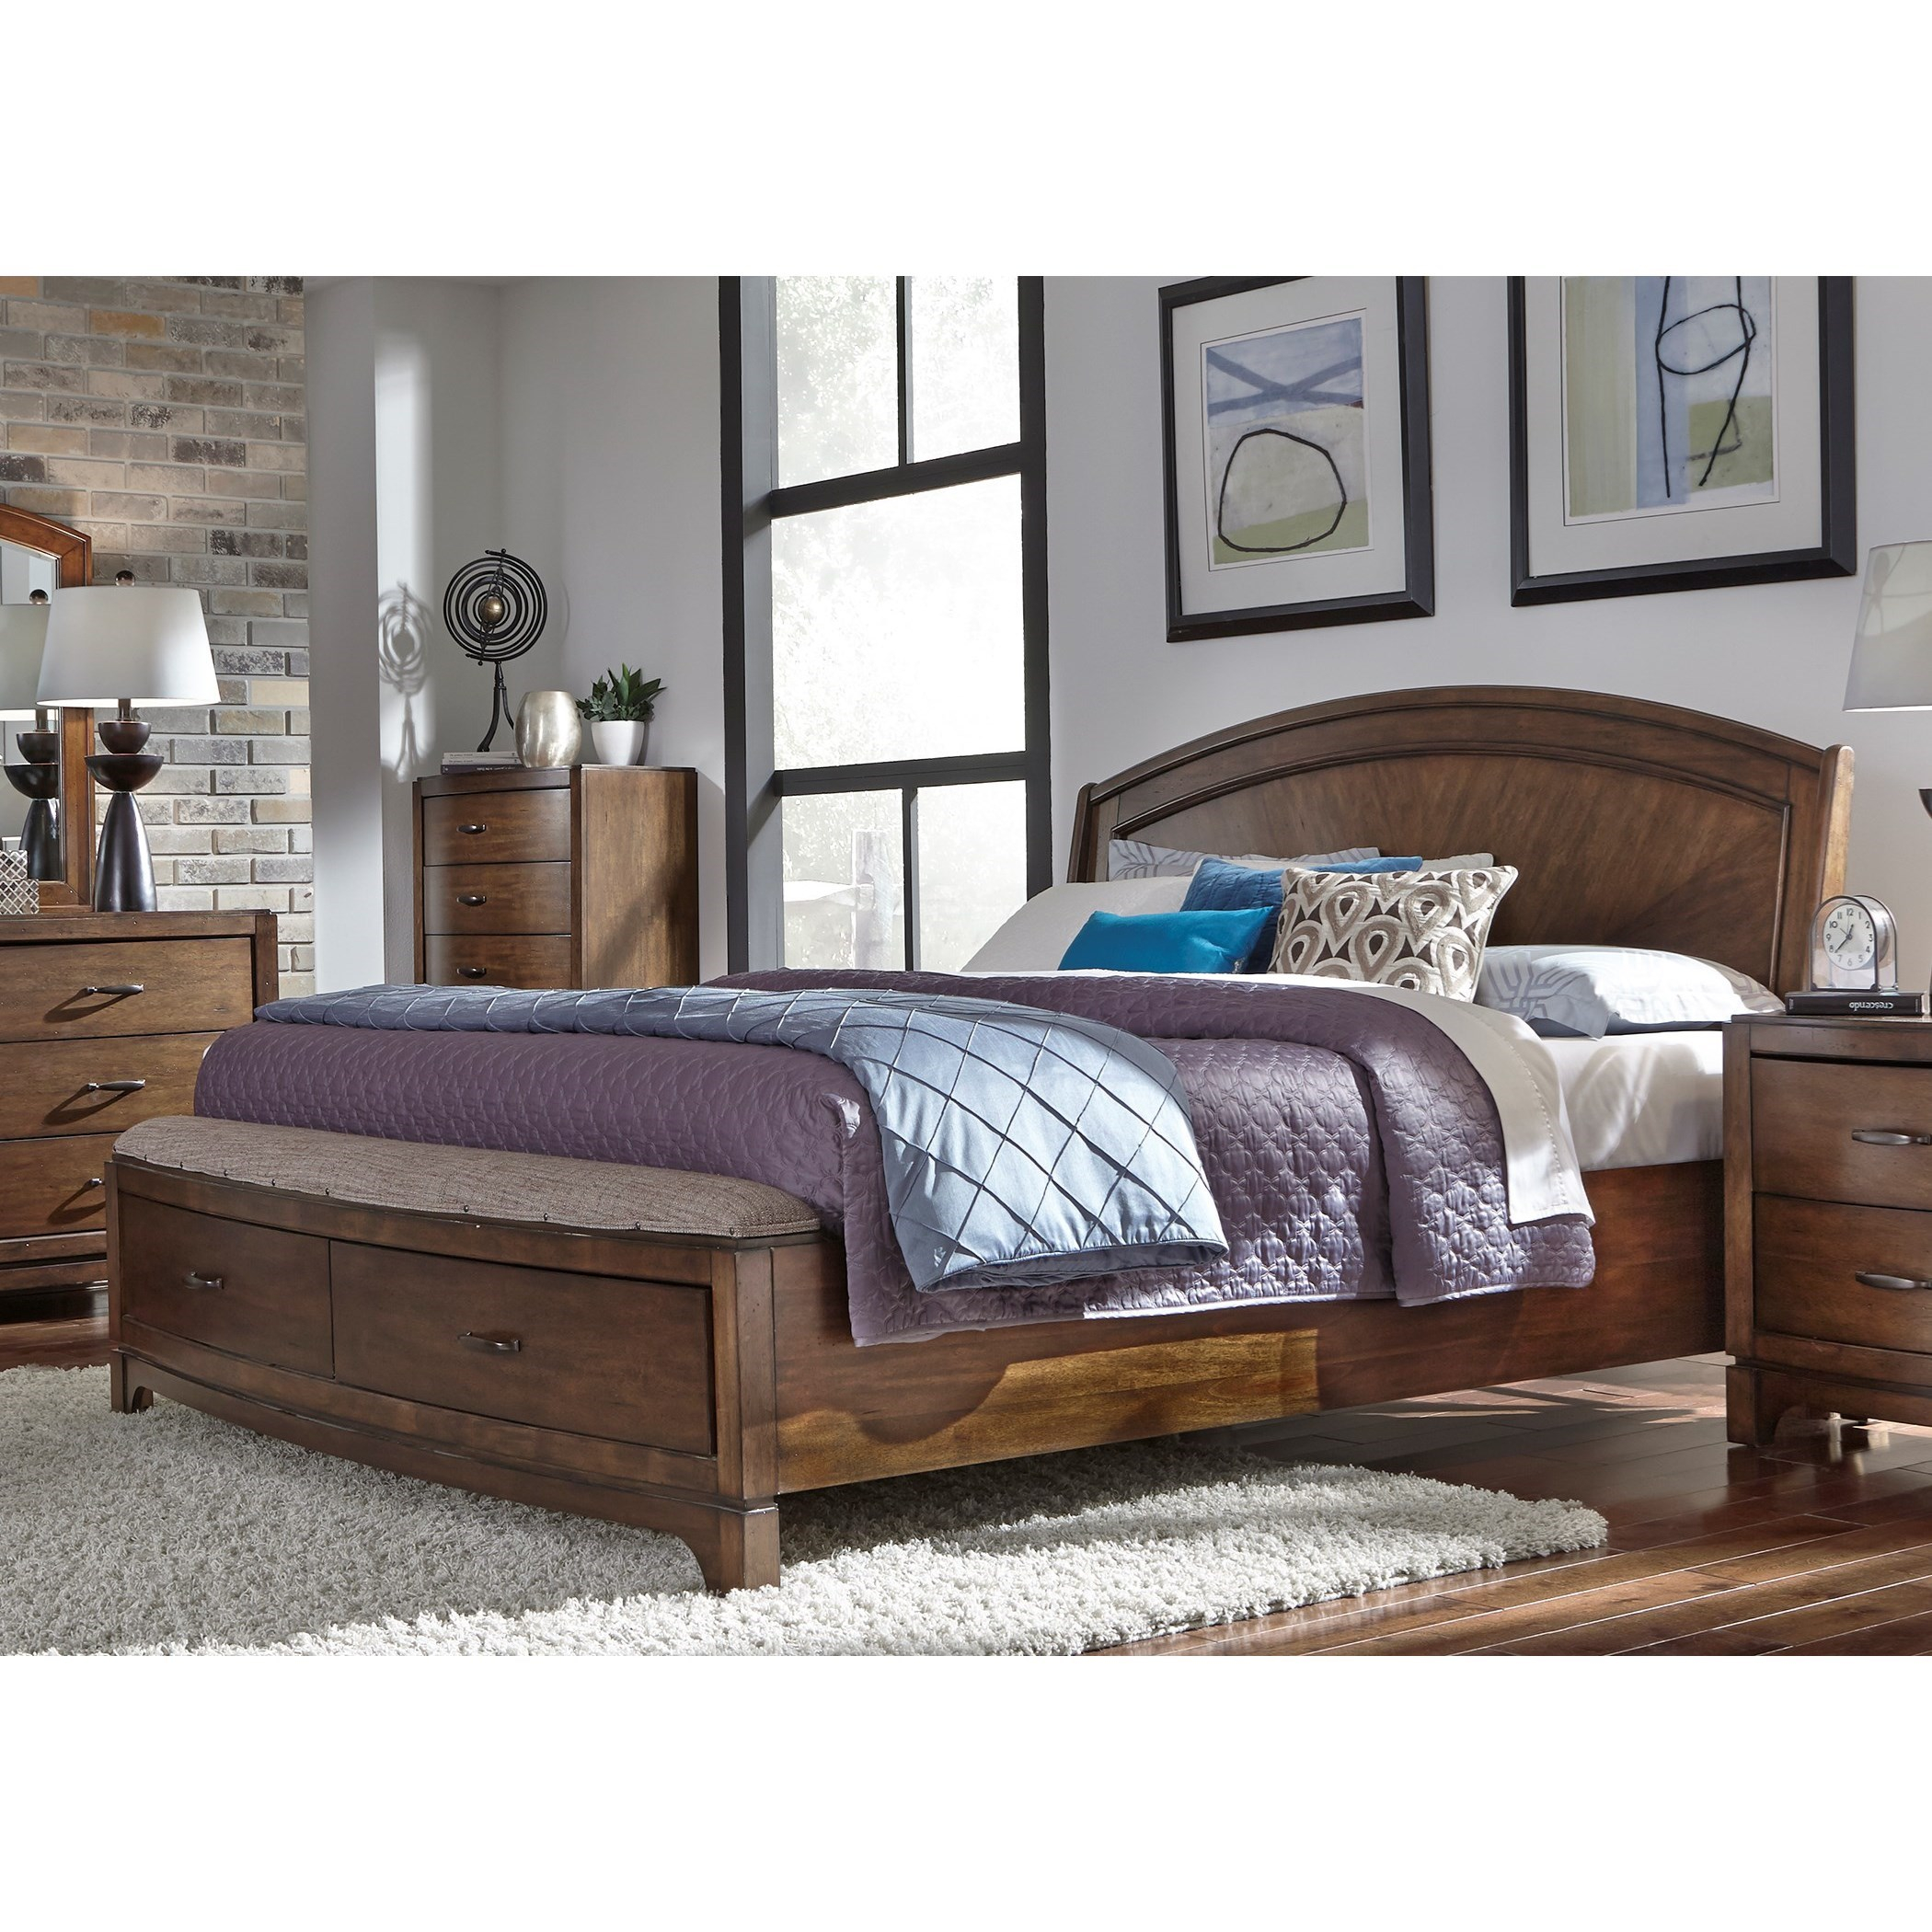 Avalon Iii King Panel Storage Bed Liberty Furniture At Royal Furniture in size 2100 X 2100